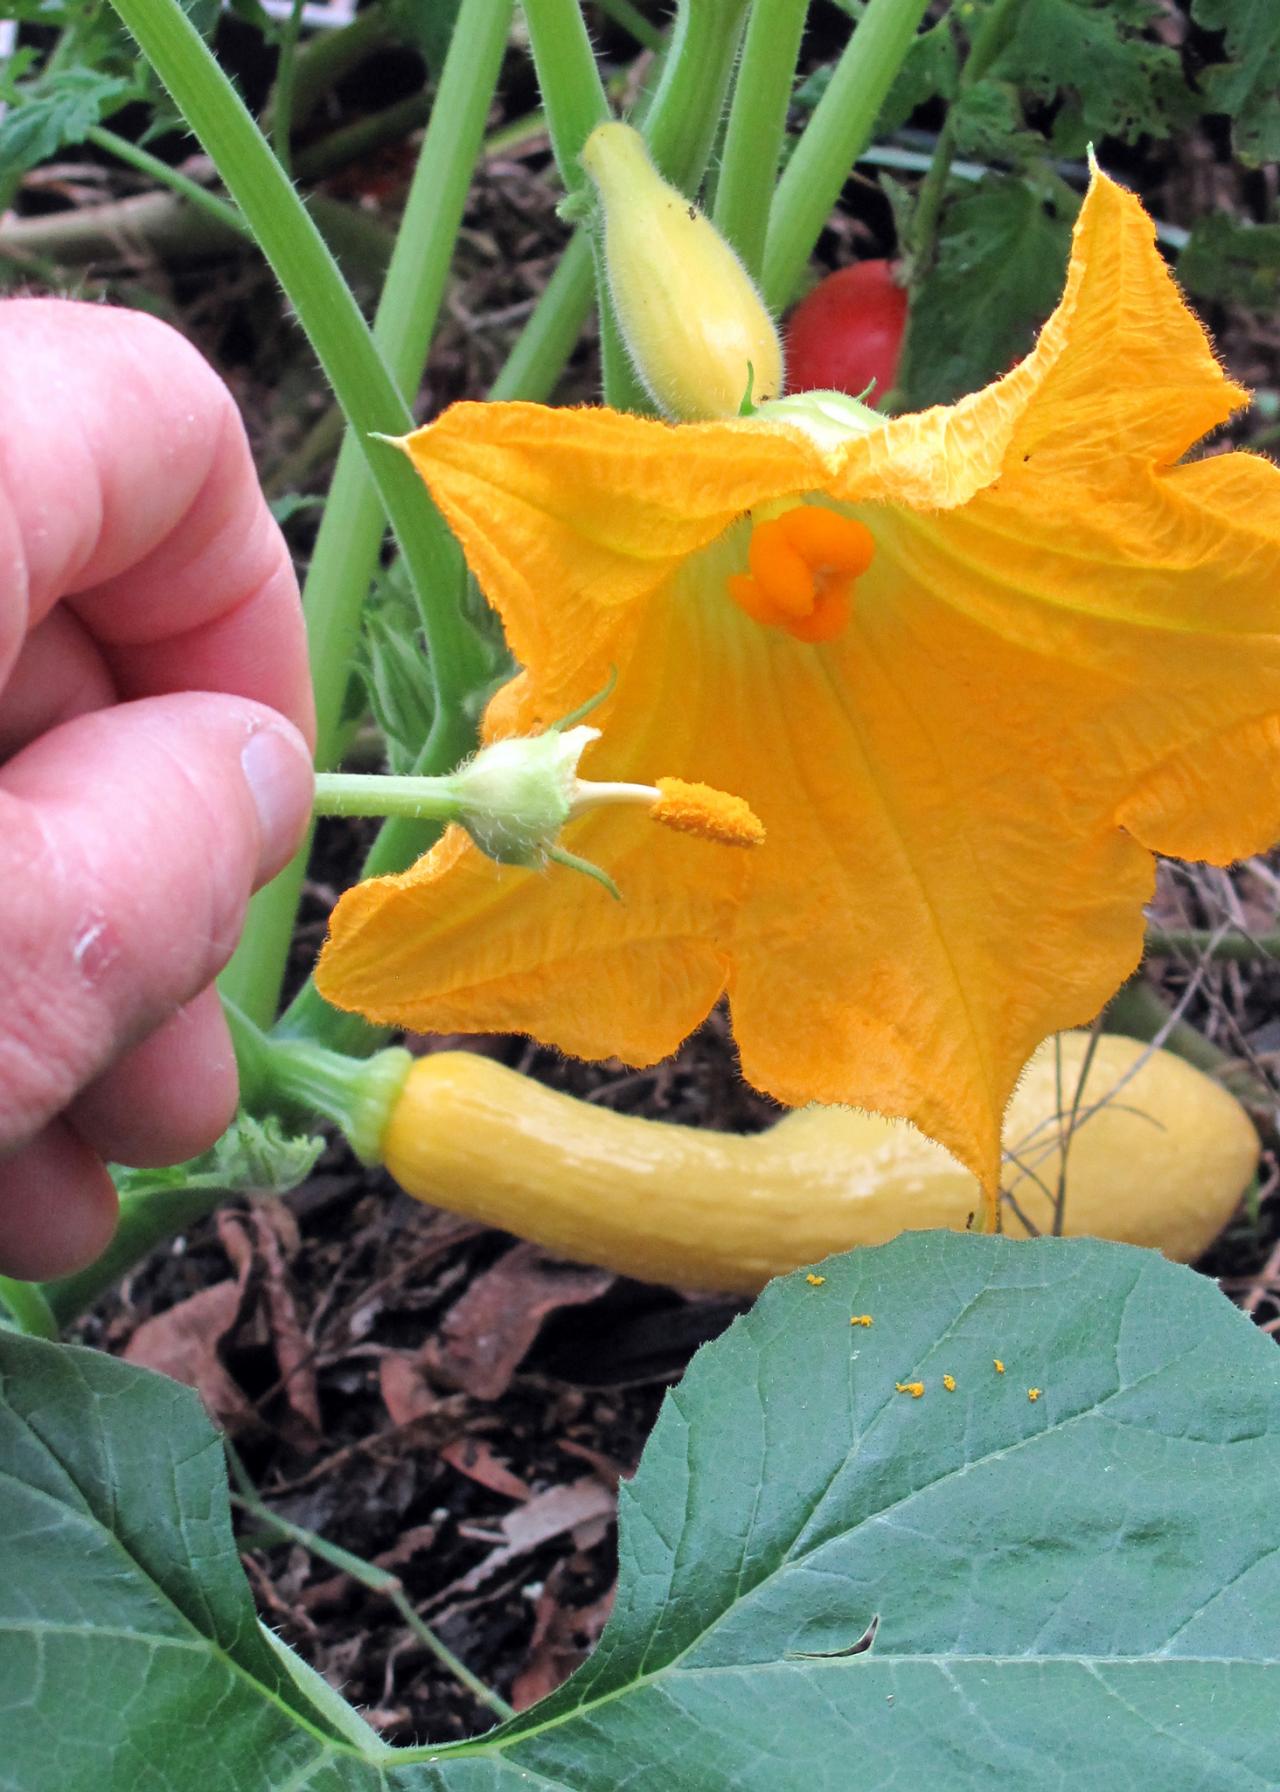 How to Pollinate Zucchini | Zucchini Blooms But No Fruit | HGTV